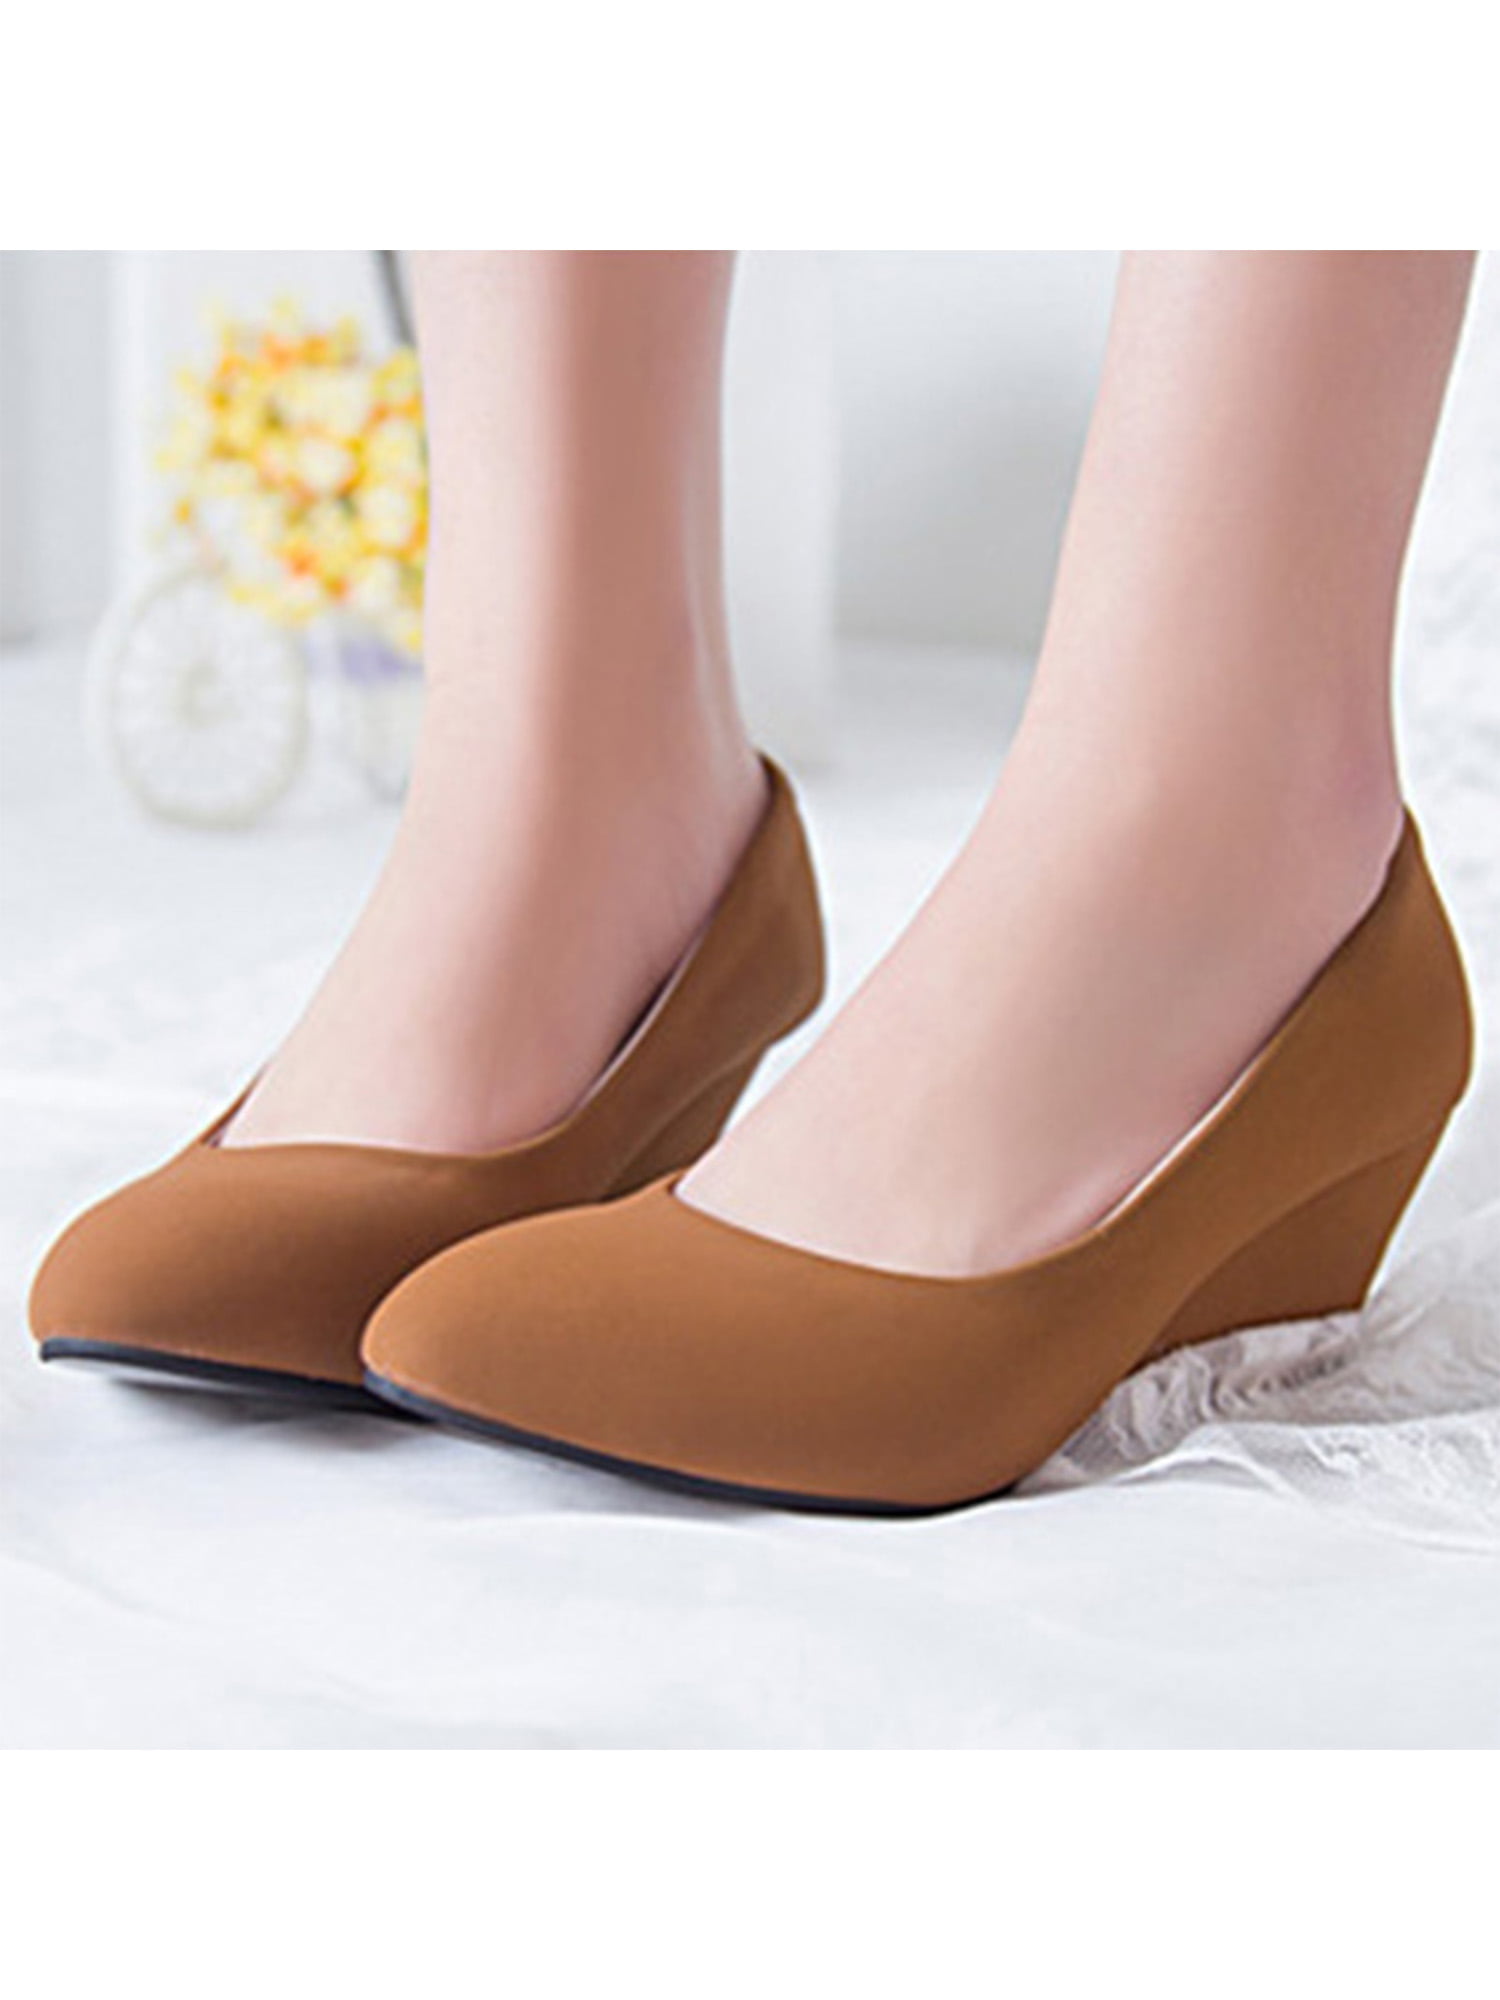 Details about   Women's Slip On Casual Shoes Low Wedge Heel Round Toe Pumps Dress Shoes 34/43 D 